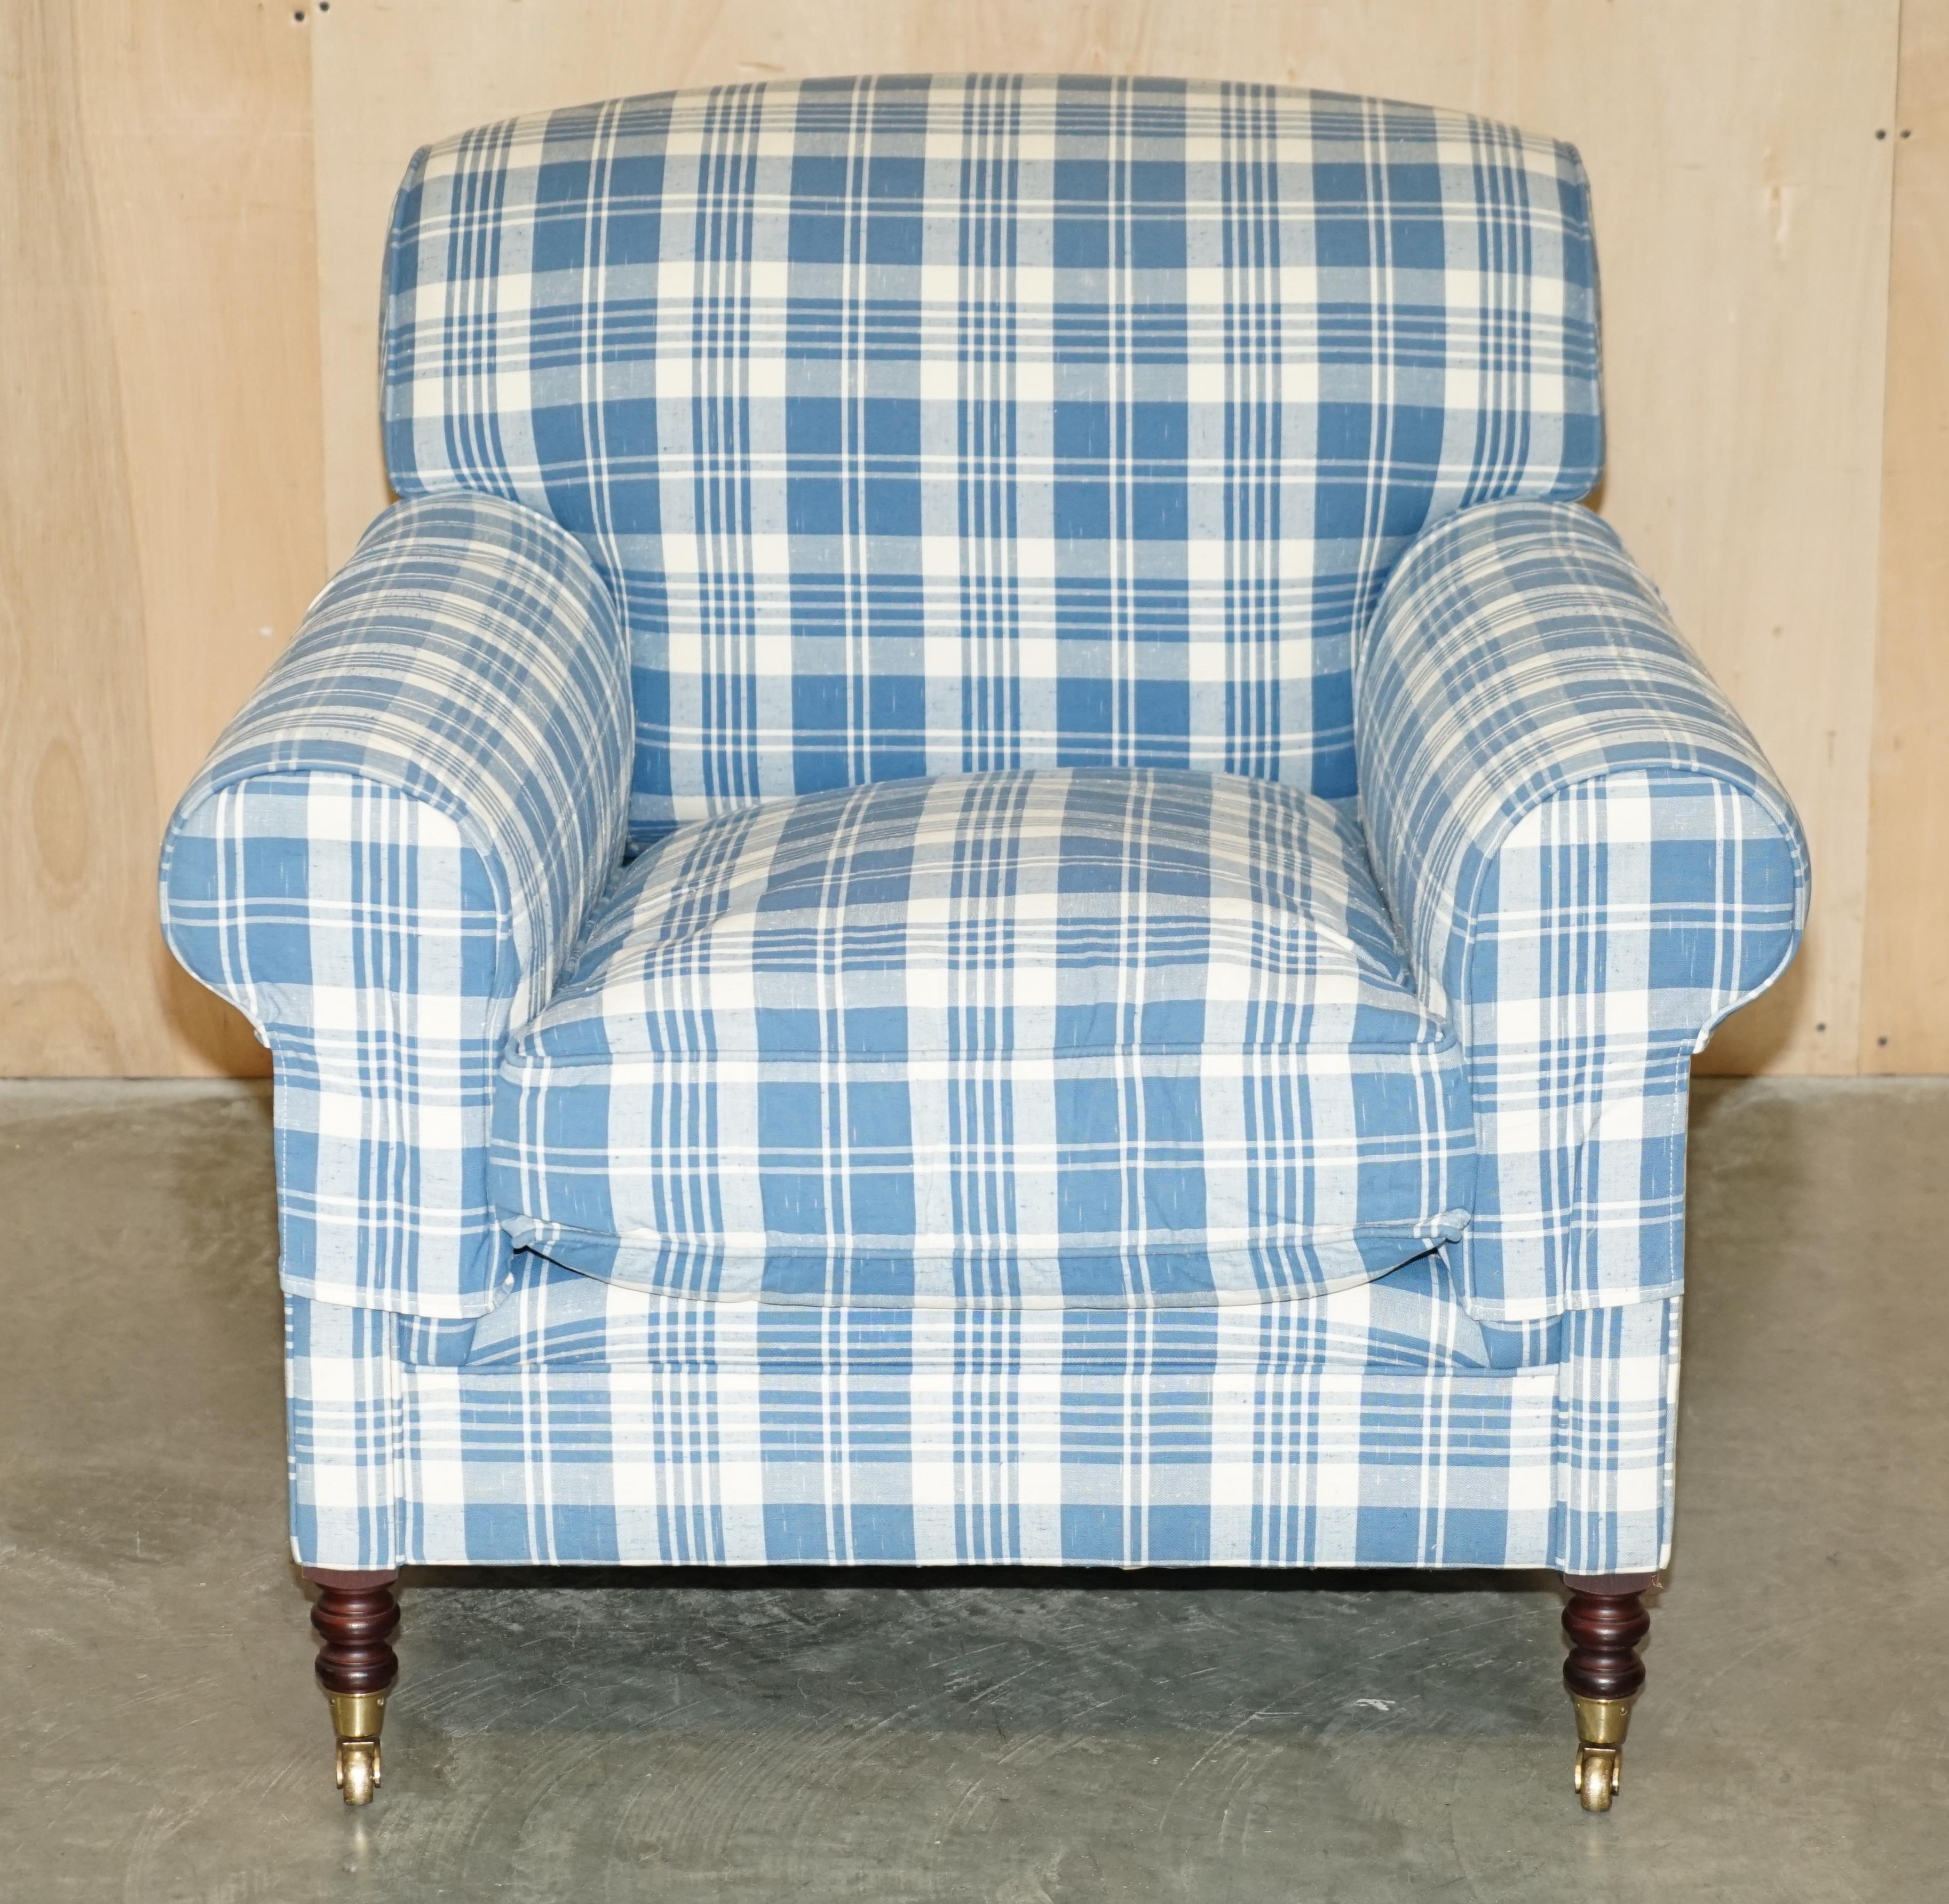 Royal House Antiques

Royal House Antiques is delighted to offer for sale this absolutely stunning, George Smith Chelsea, Signature full scroll arm armchair with feather filled cushion and checked upholstery RRP £6300

Please note the delivery fee